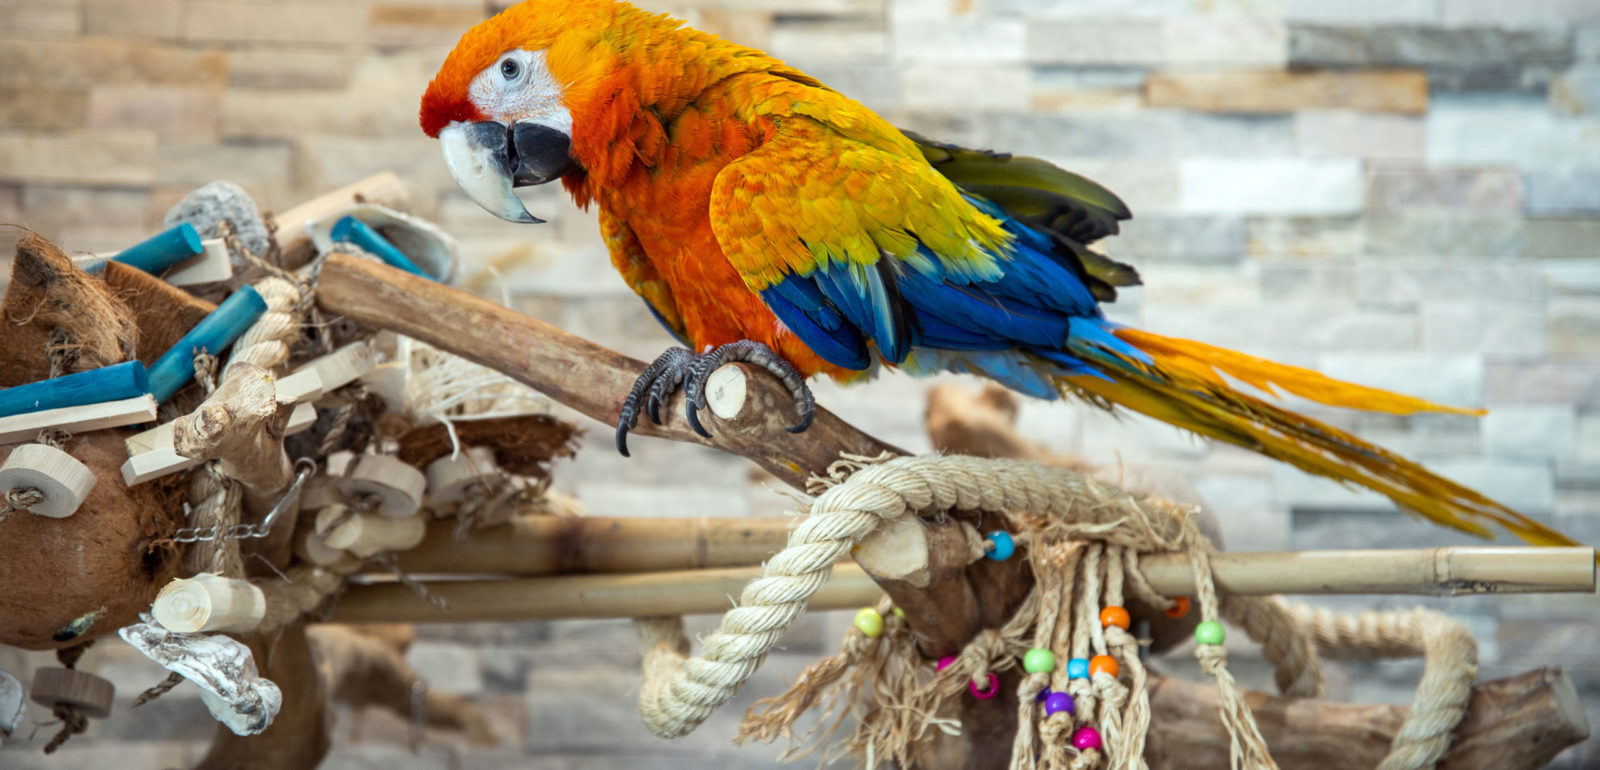 Maui the scarlet macaw on his wooden perch at our Wildwood Crest hotel